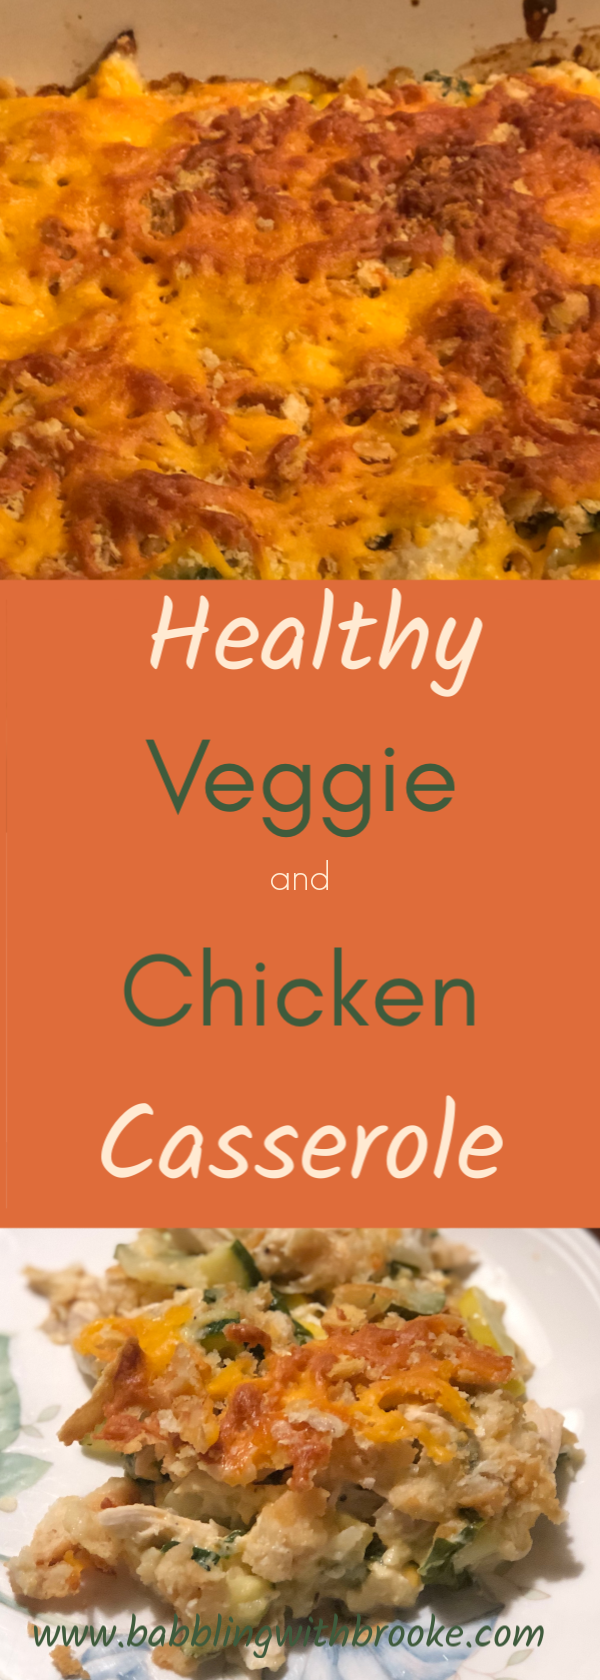 This easy, healthy casserole recipe is perfect for a busy night! They make perfect leftovers and is absolutely delicious! #easycasserole #healthycasserole #casserolerecipe #chickencasserole #easydinnerrecipe 